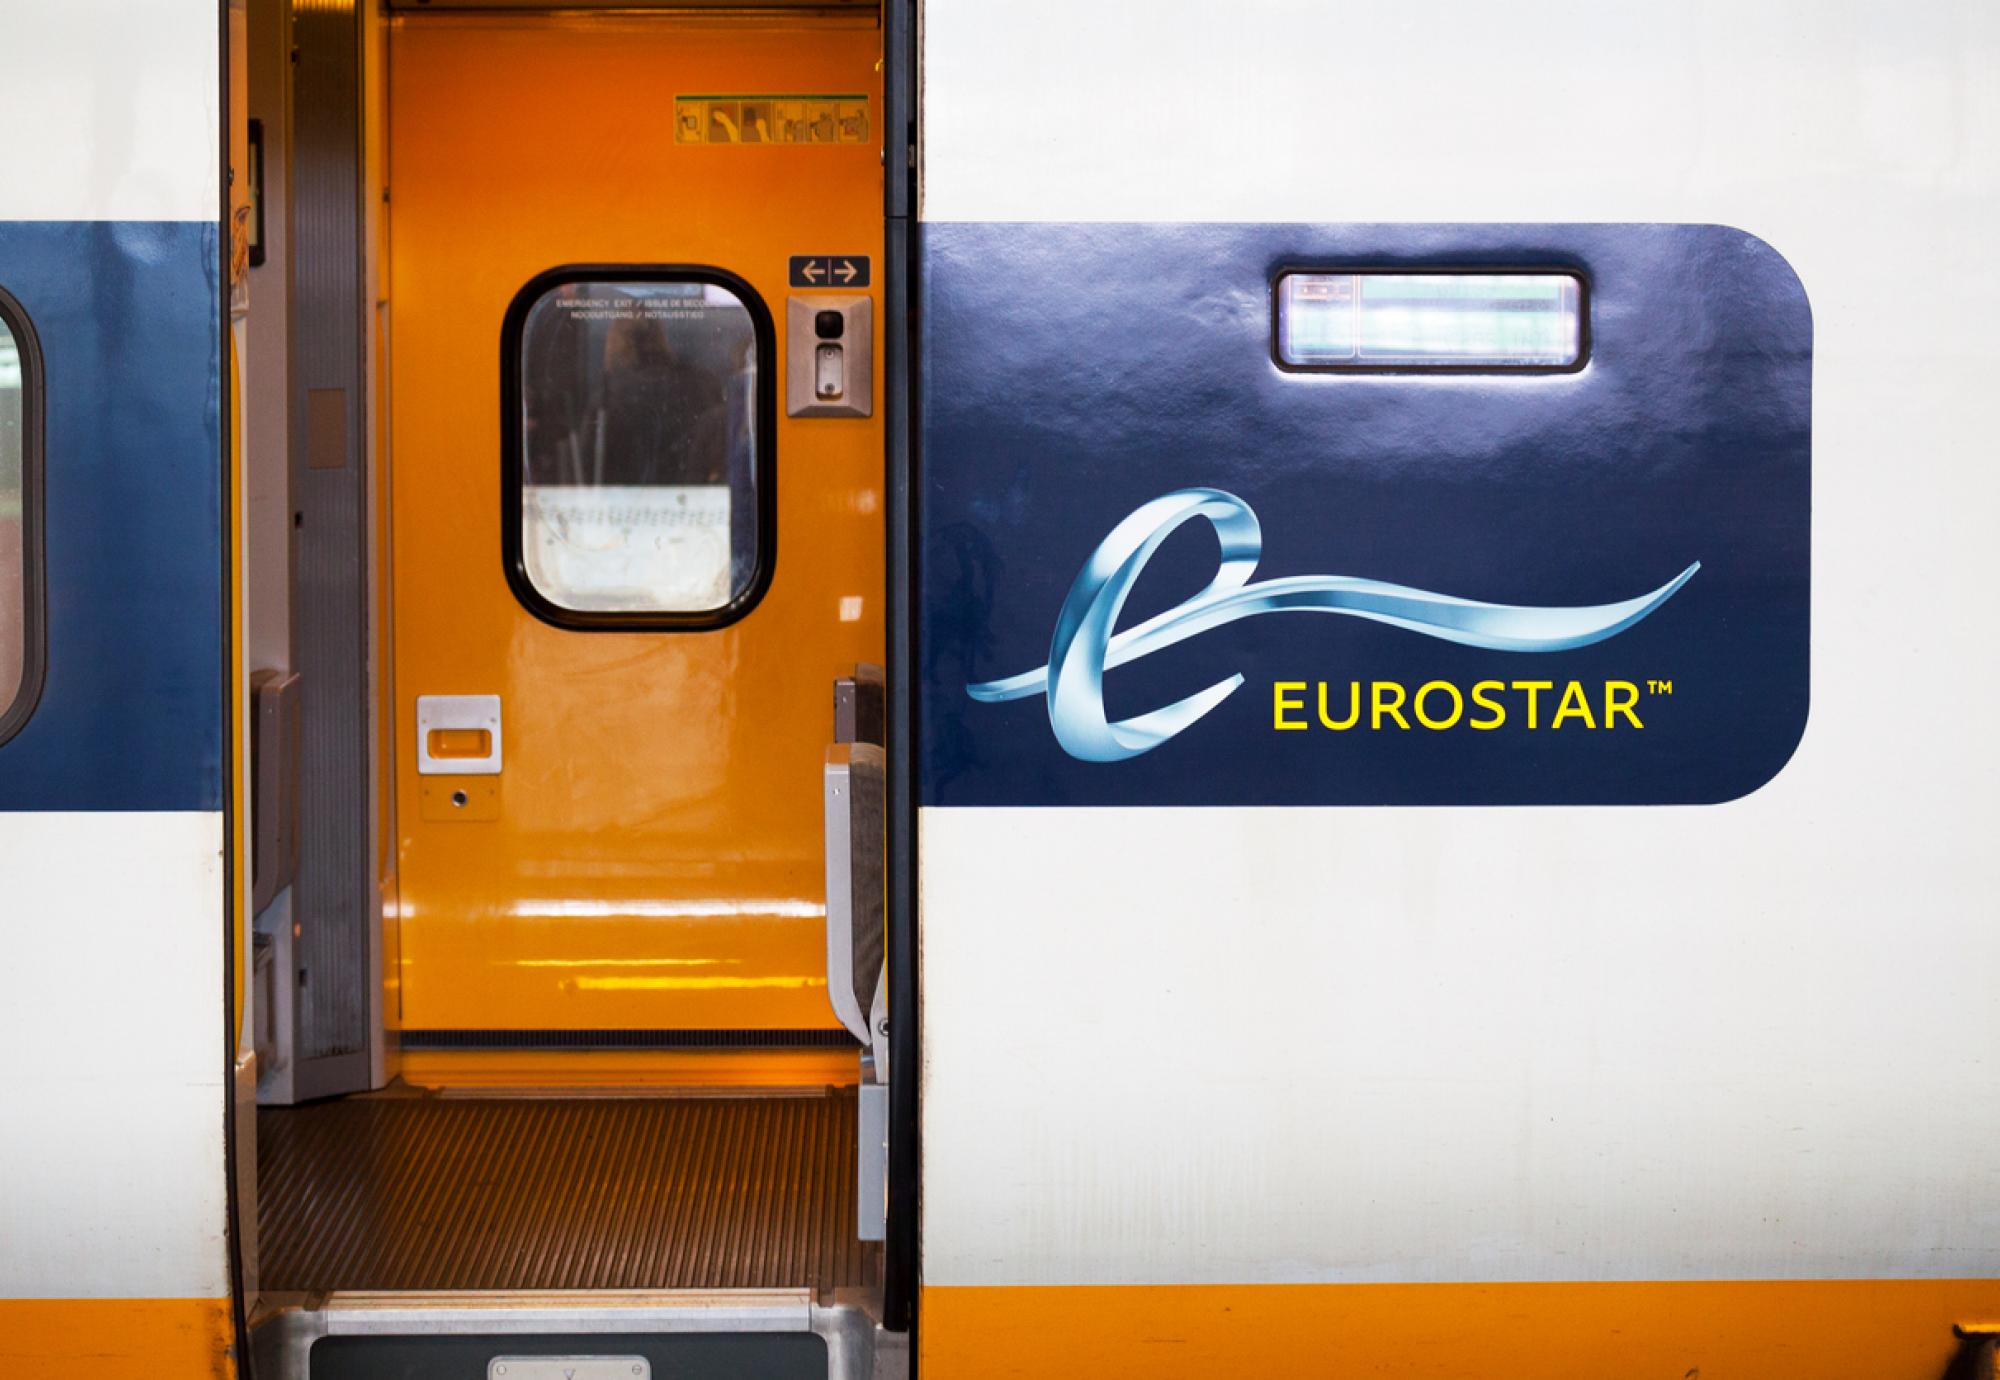 New contactless technology for Eurostar aims to speed up the check-in process